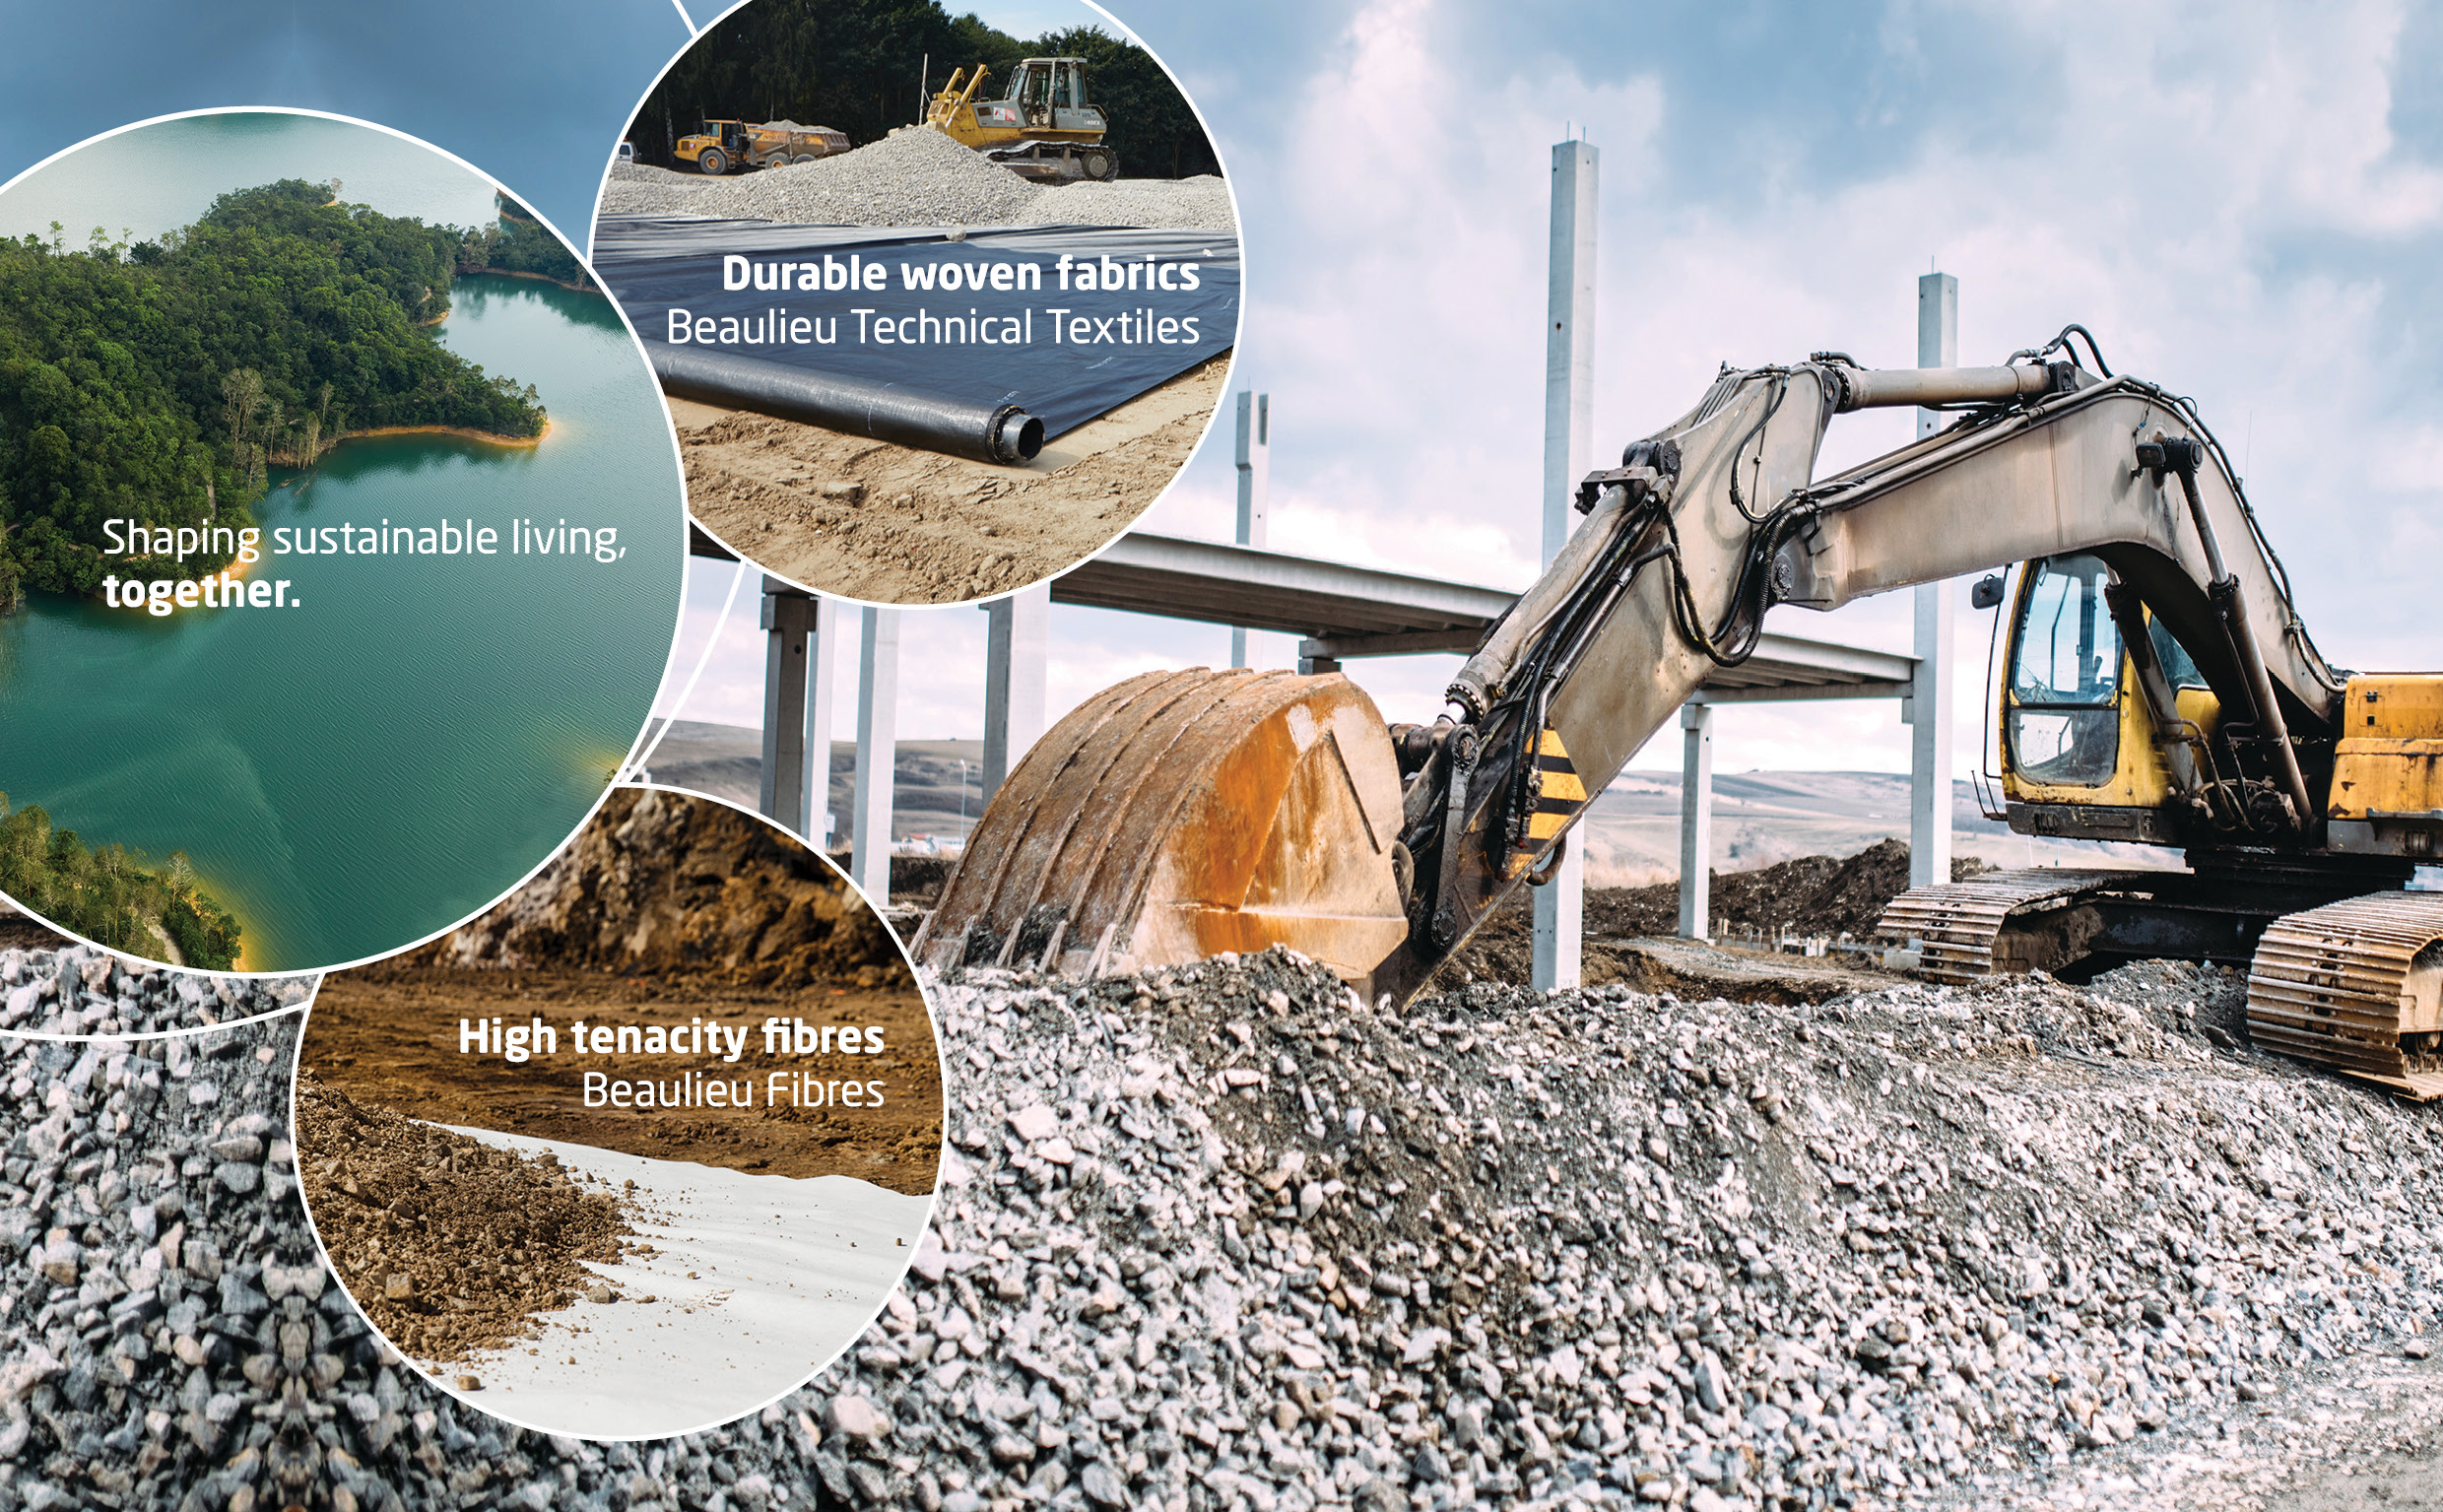 Explore the durability & carbon-footprint reduction benefits of geotextile fibres & woven fabrics at EuroGeo7